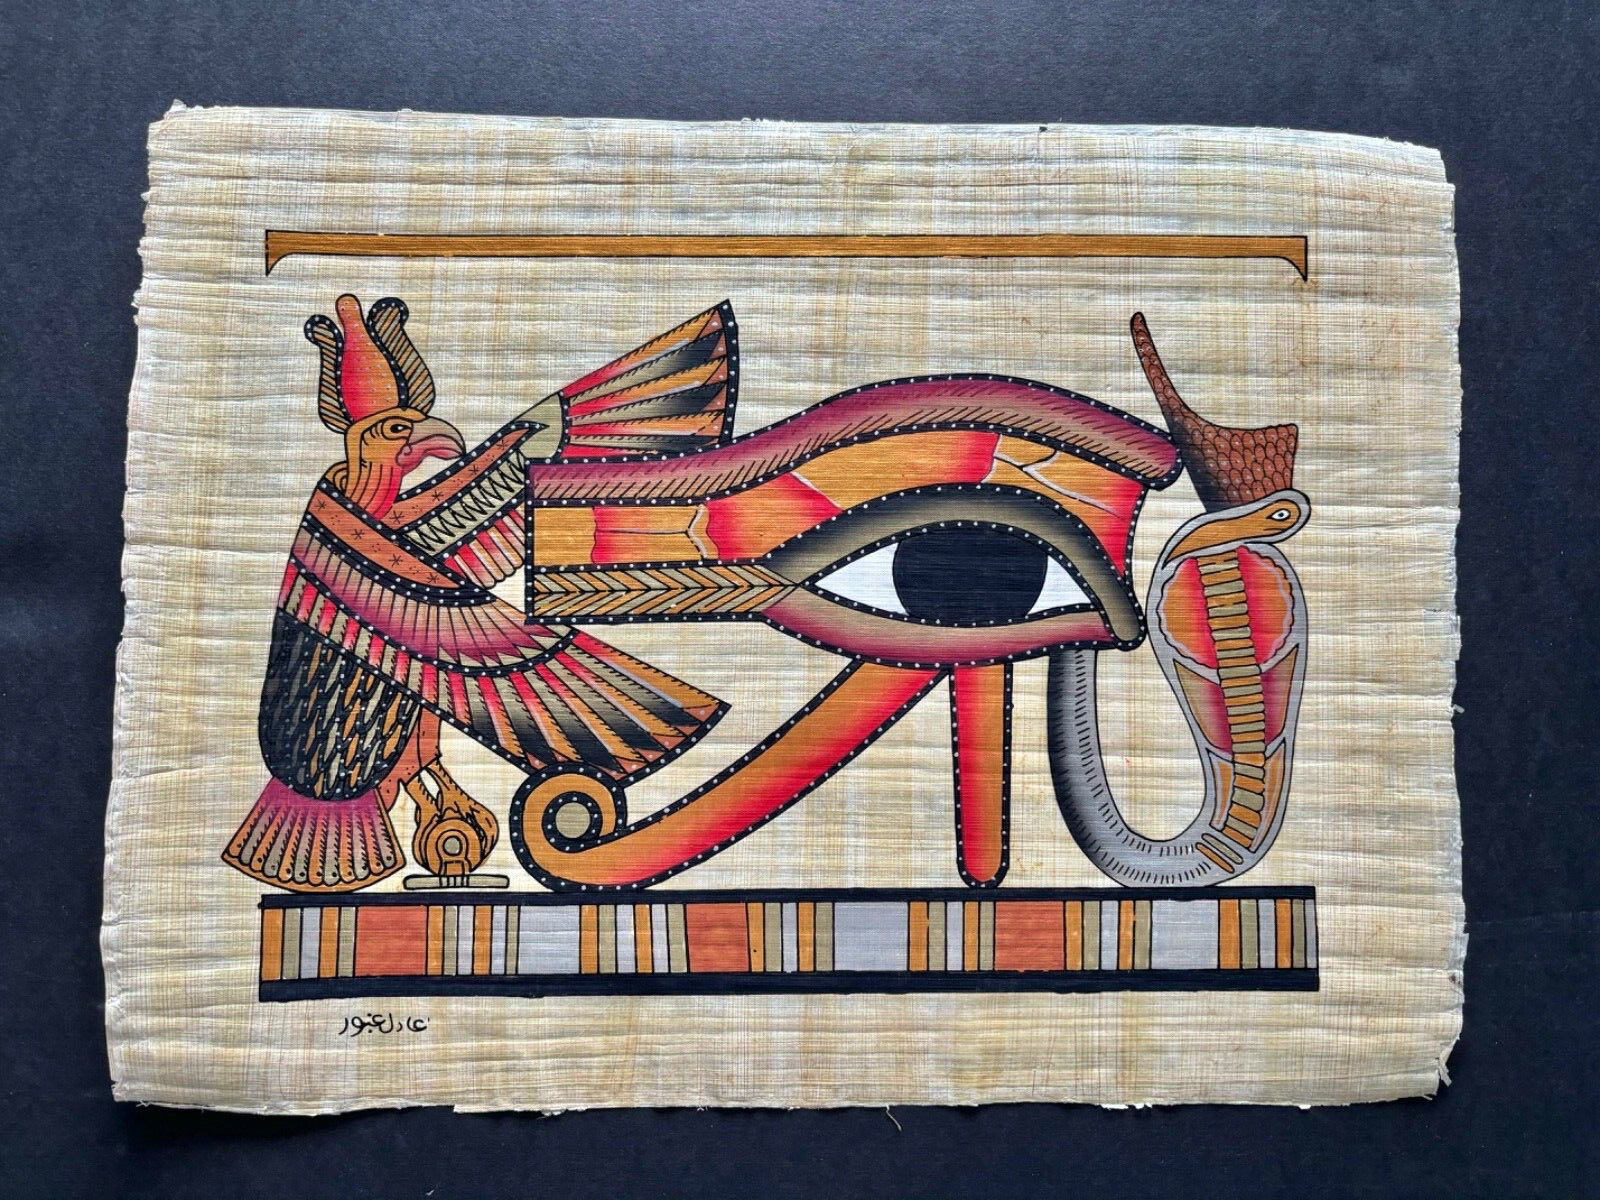 Vintage Egyptian Papyrus Hand Painted Art FeaturingThe Eye Of Horus 17”x 12 1/2”